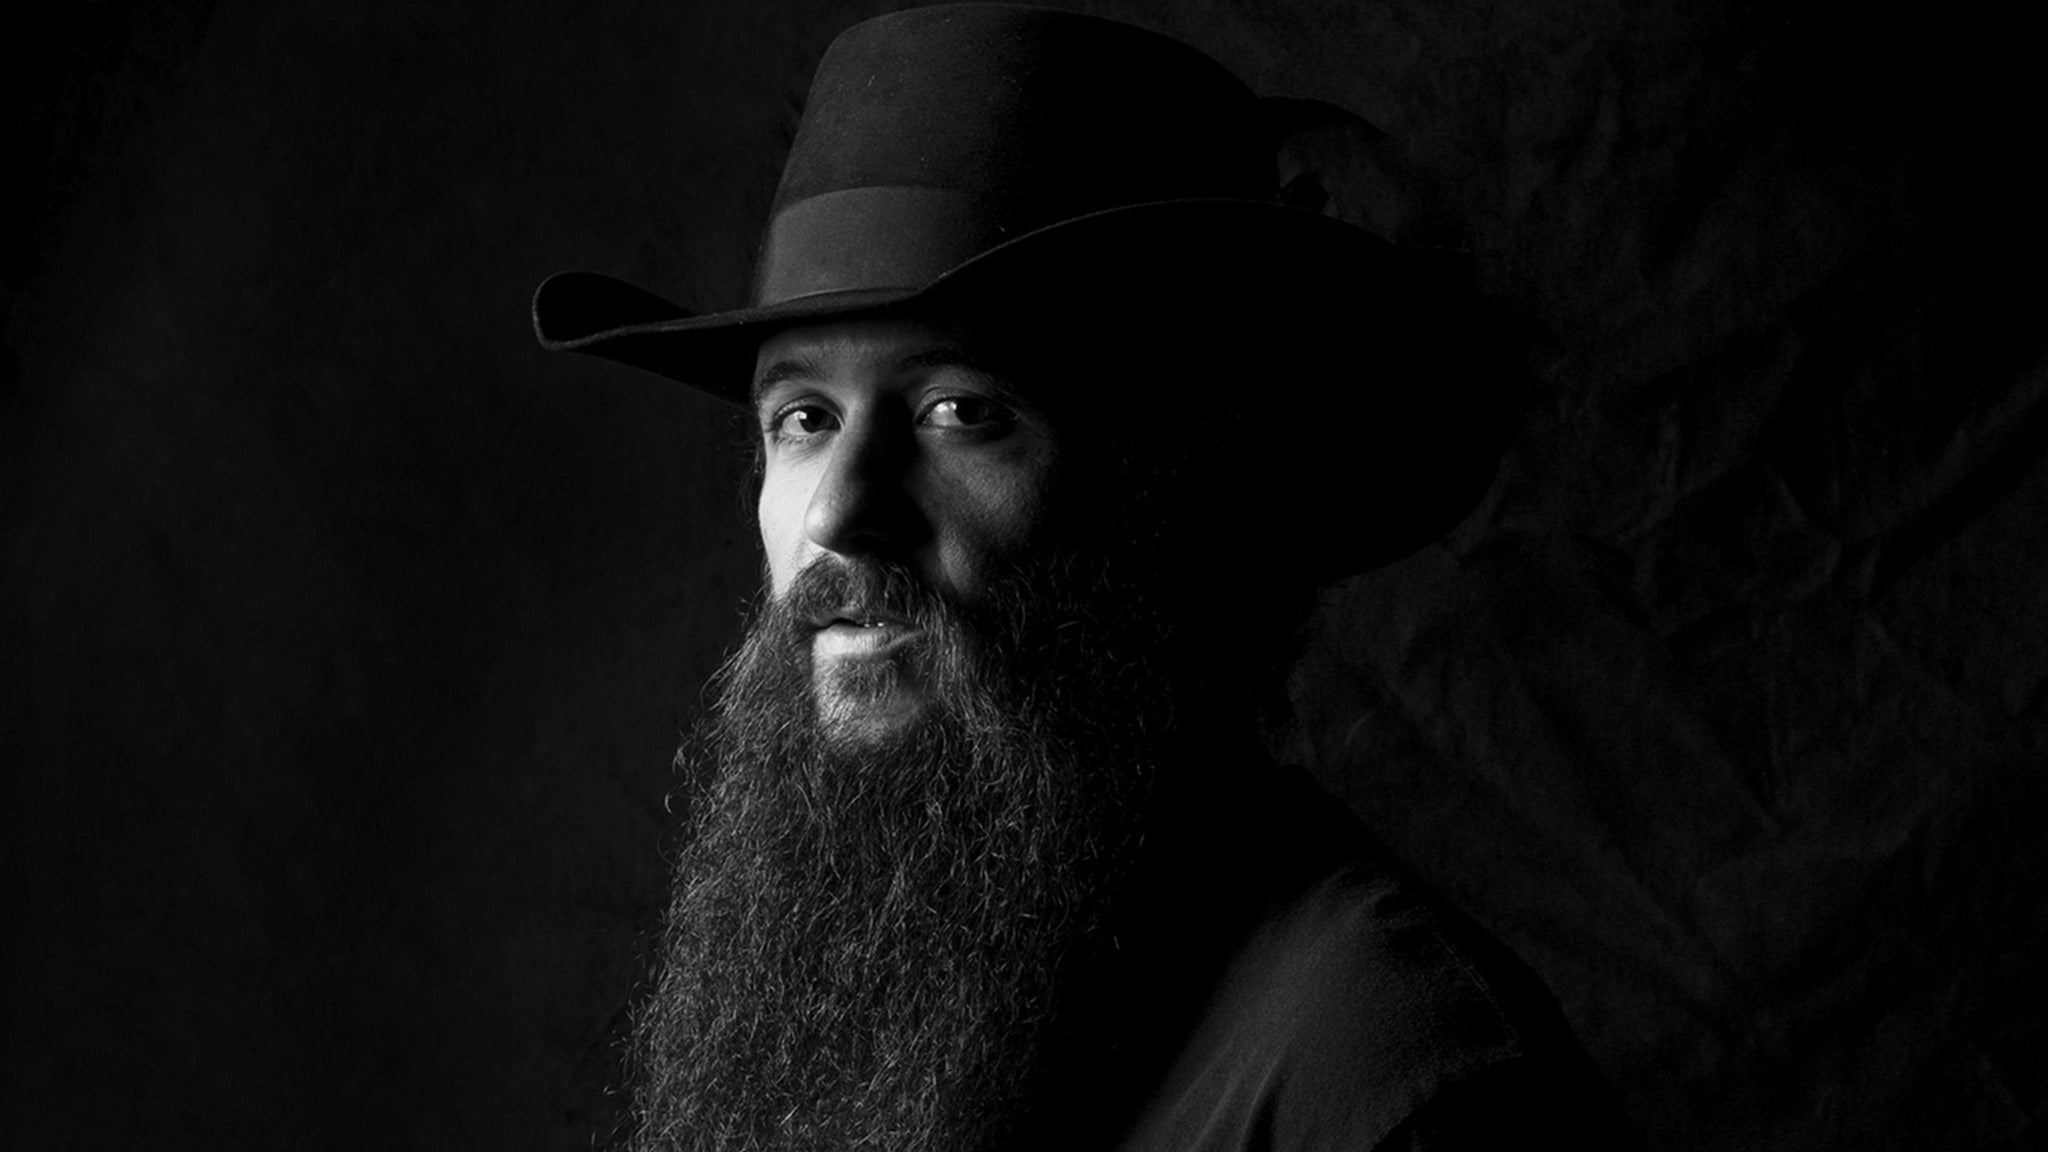 new presale password for Cody Jinks face value tickets in Fort Wayne at Embassy Theatre